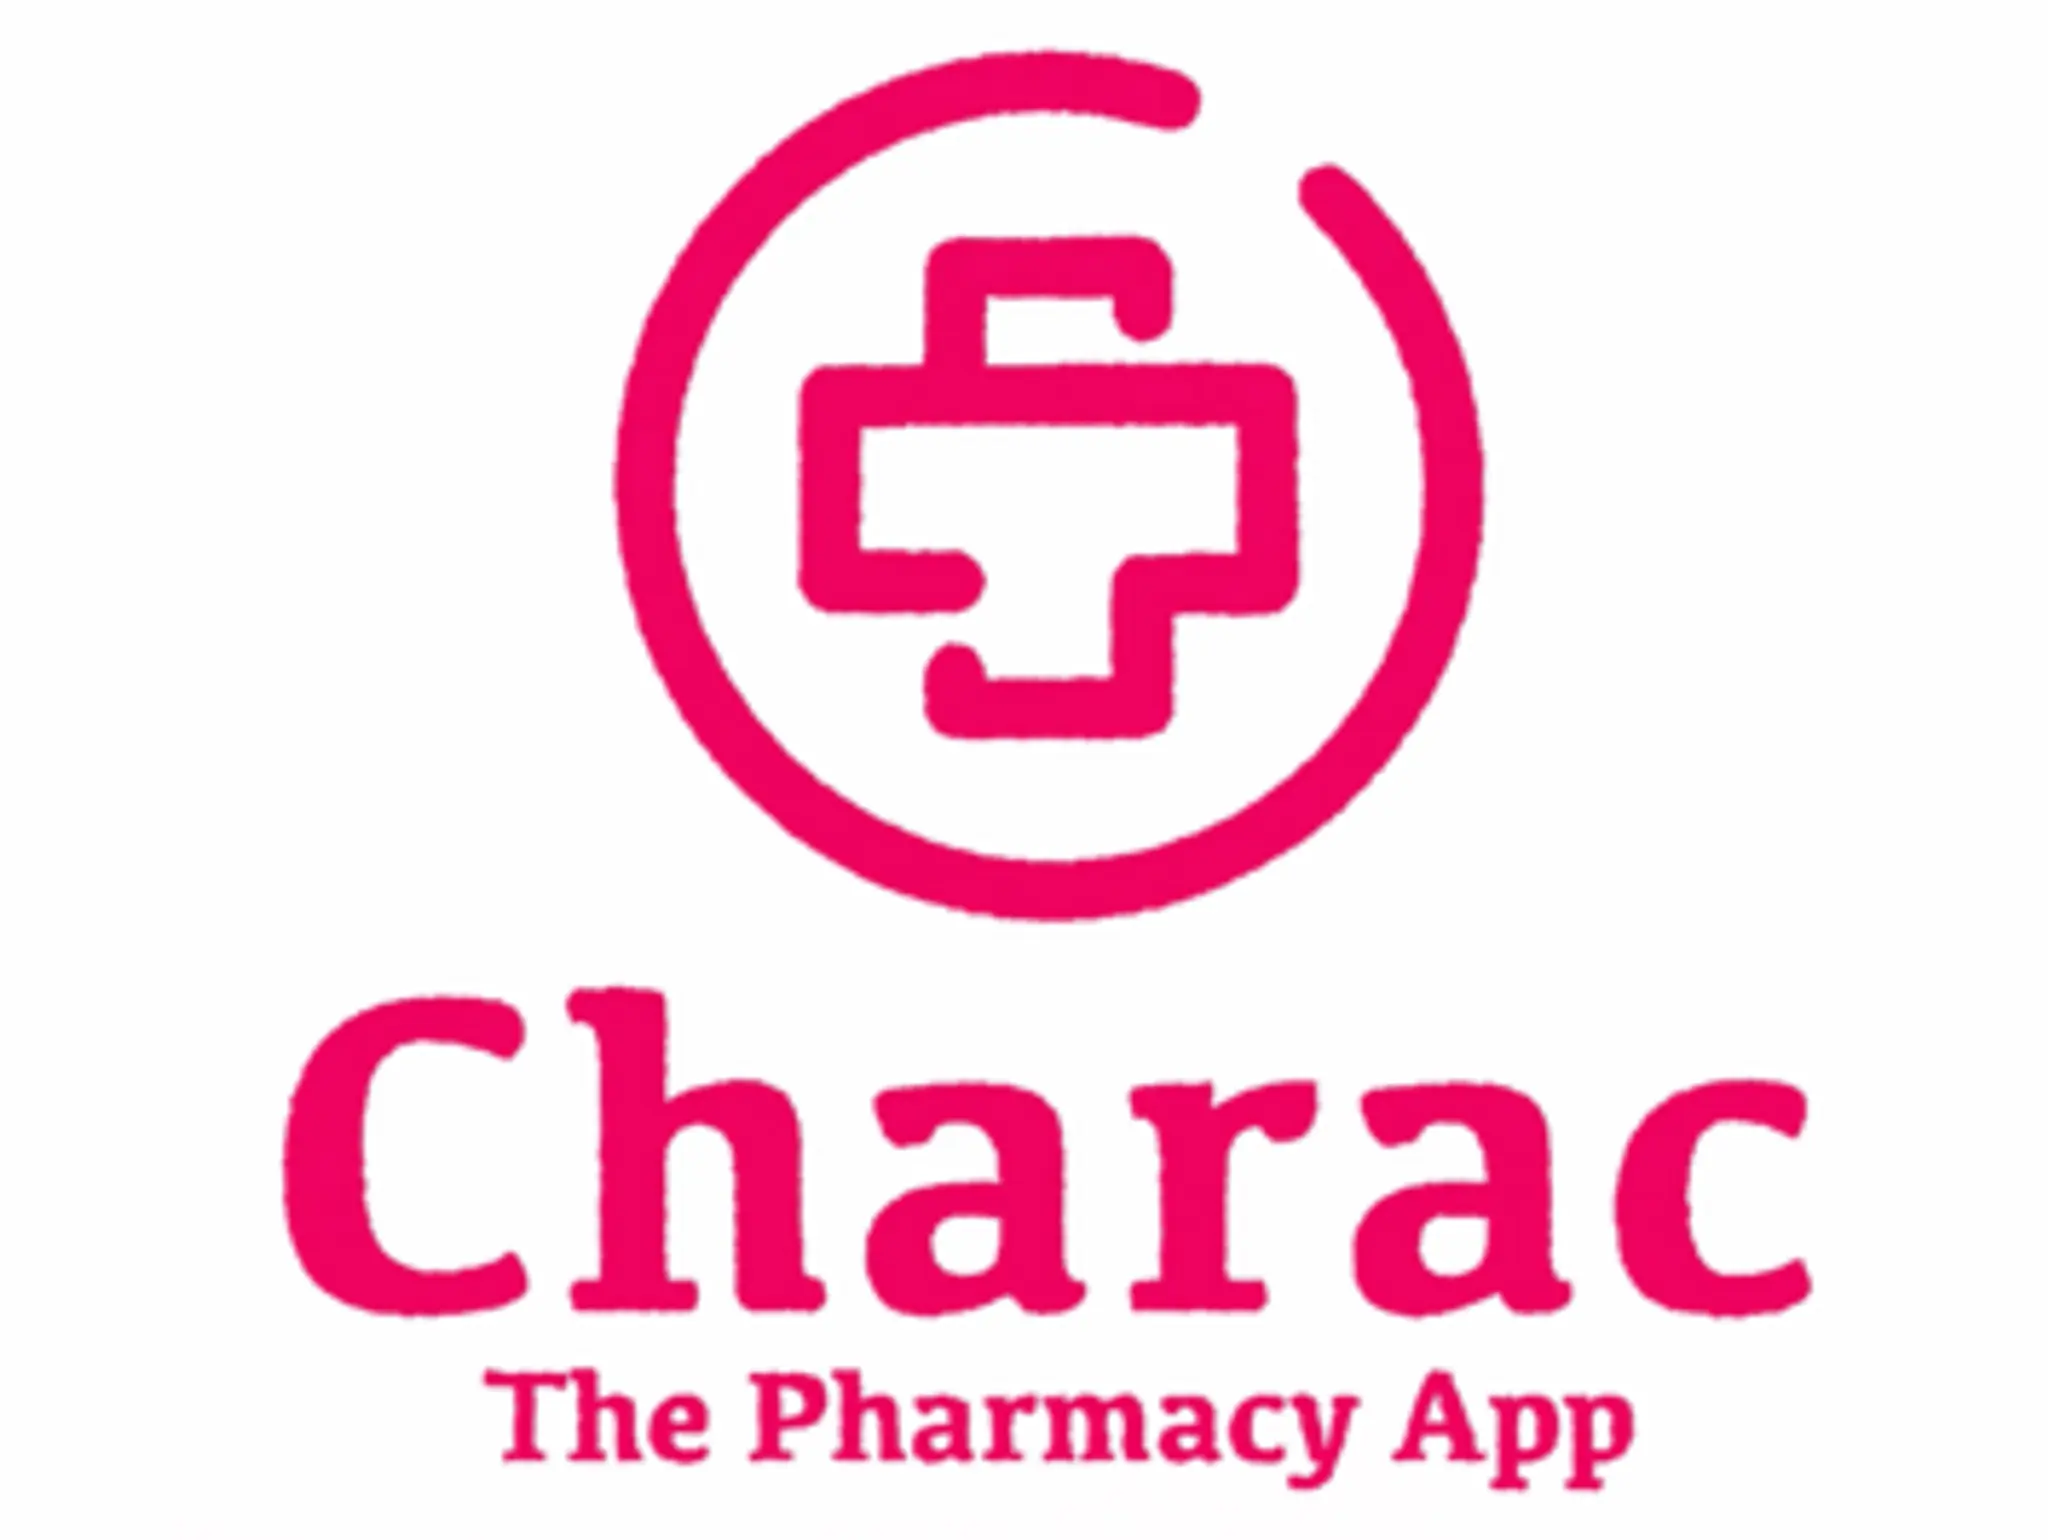 Jardines pharmacy launches app to improve patient health outcomes 